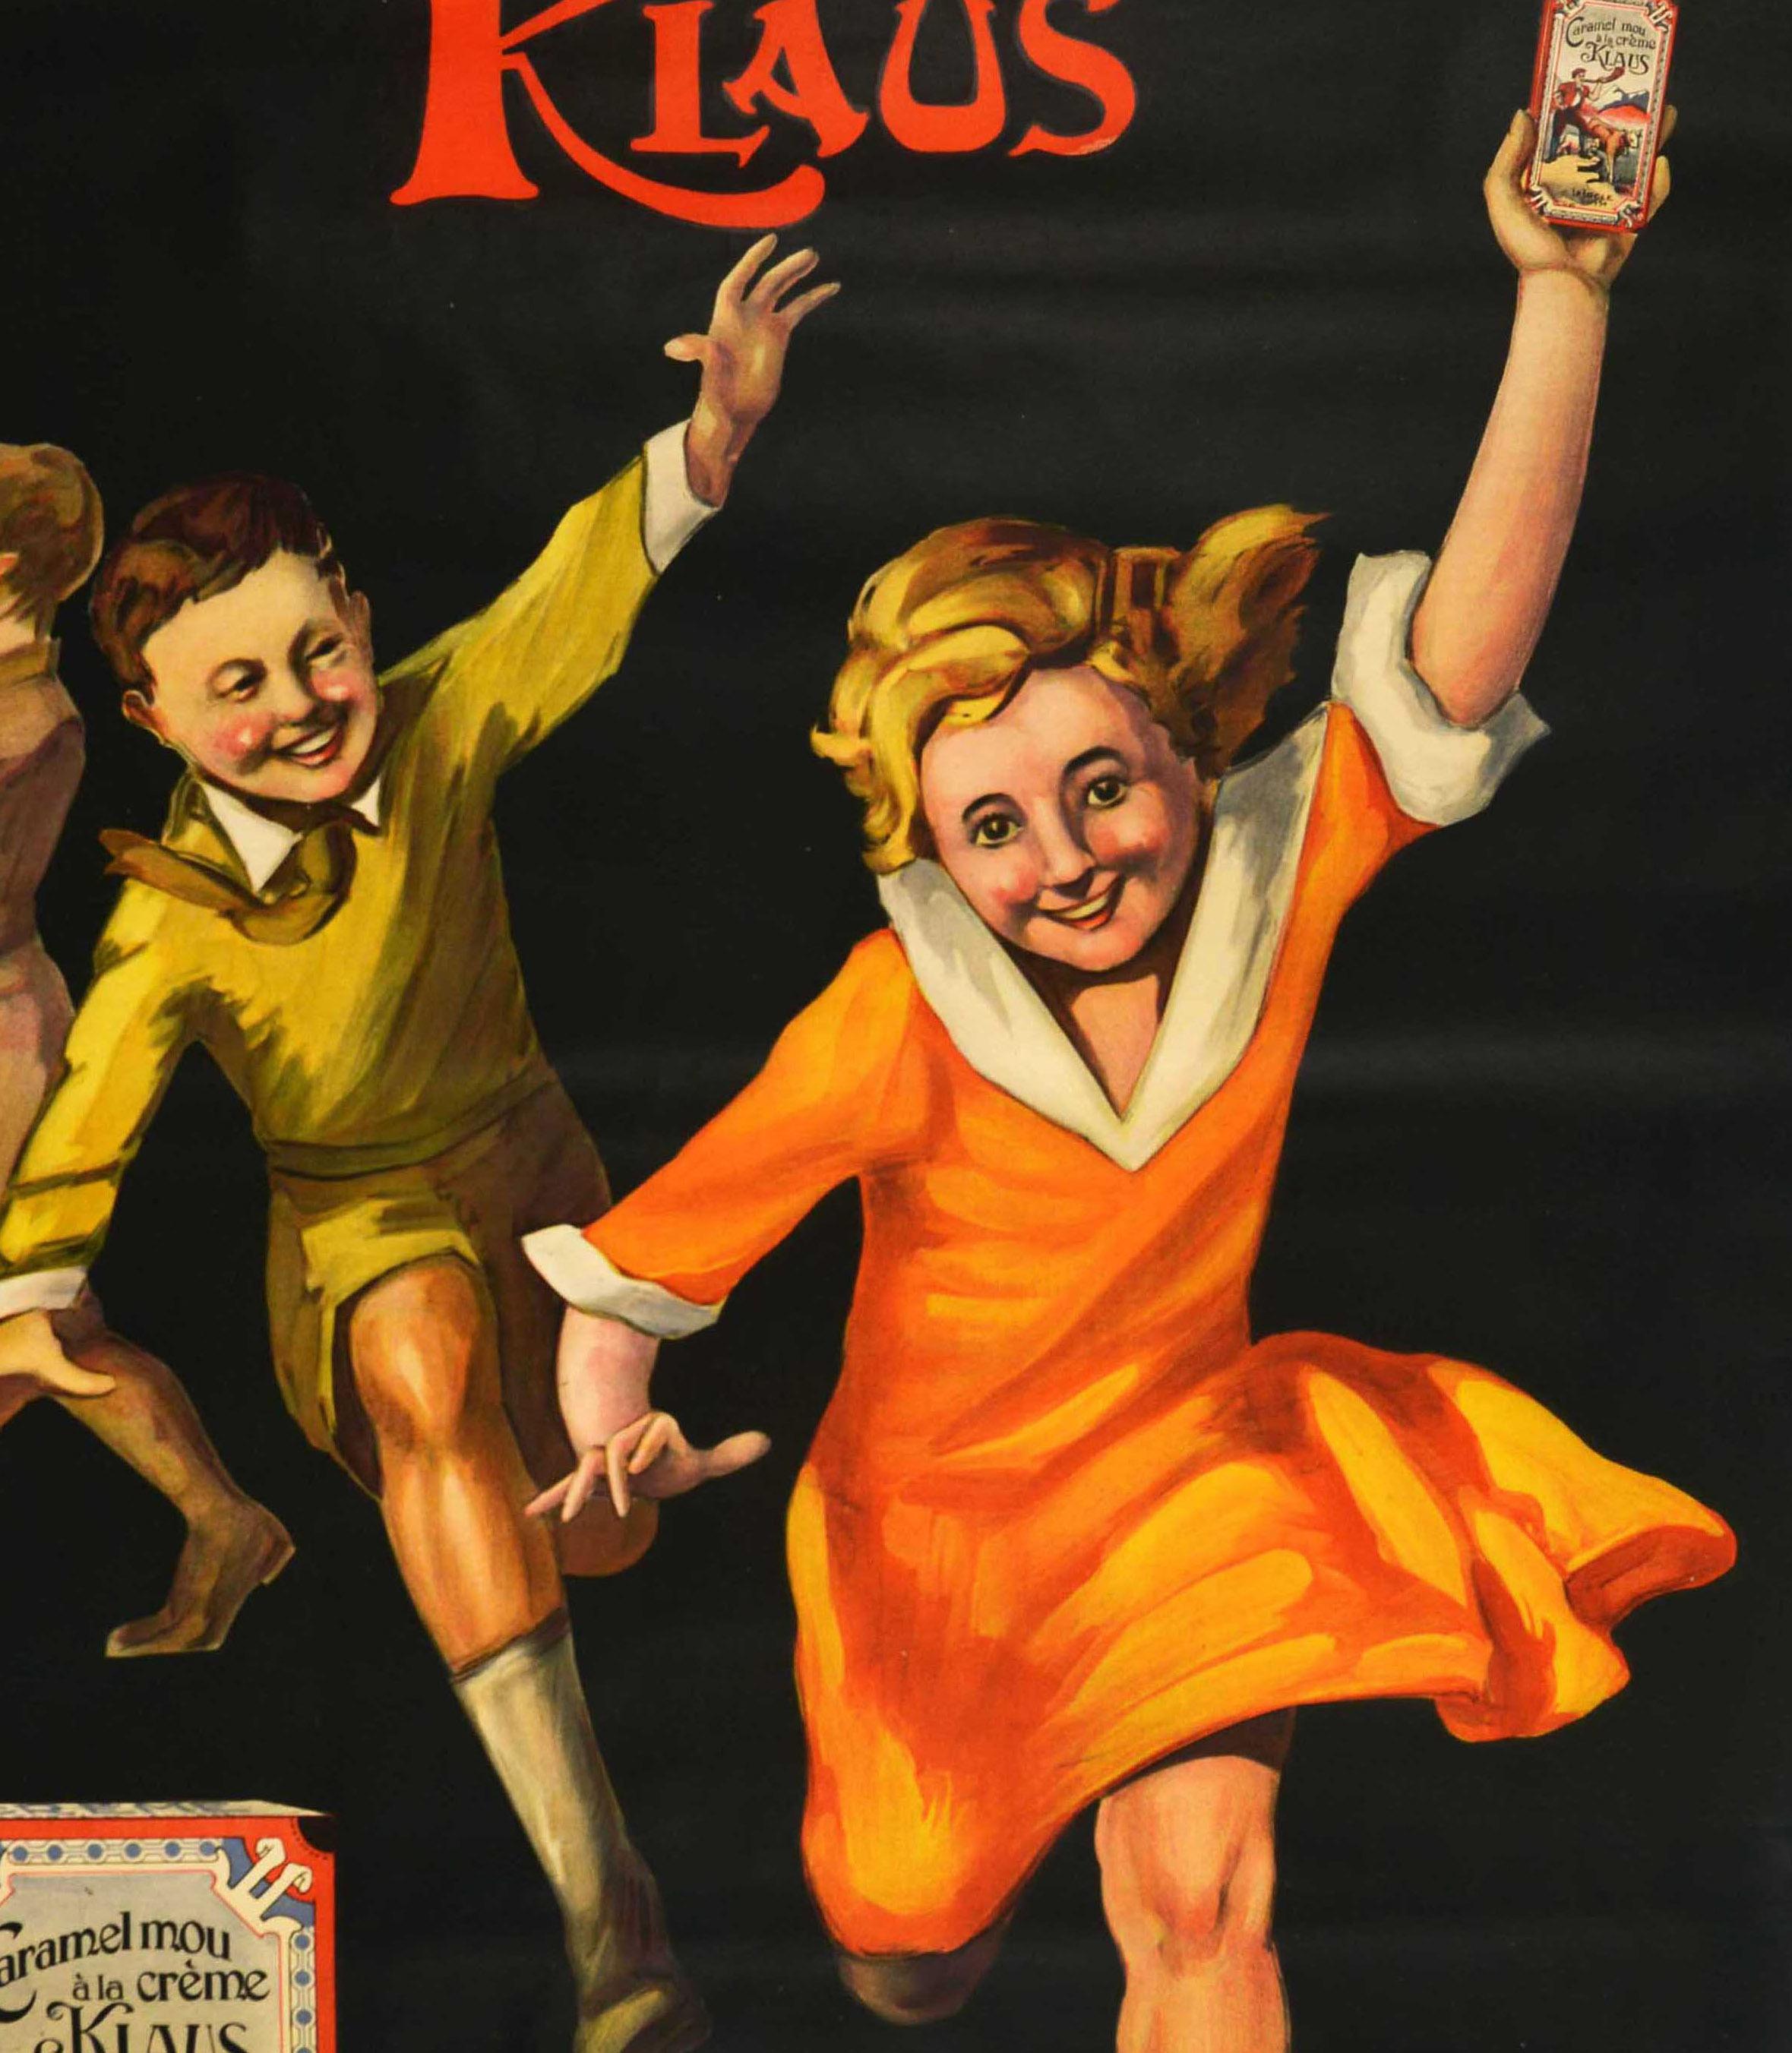 Original vintage food advertising poster for a Swiss chocolate company - Caramel Mou a la Creme Klaus - featuring a great design by Giovanni Bonfatti (b.1904) depicting happy children running on a background, the girl at the front holding a box of